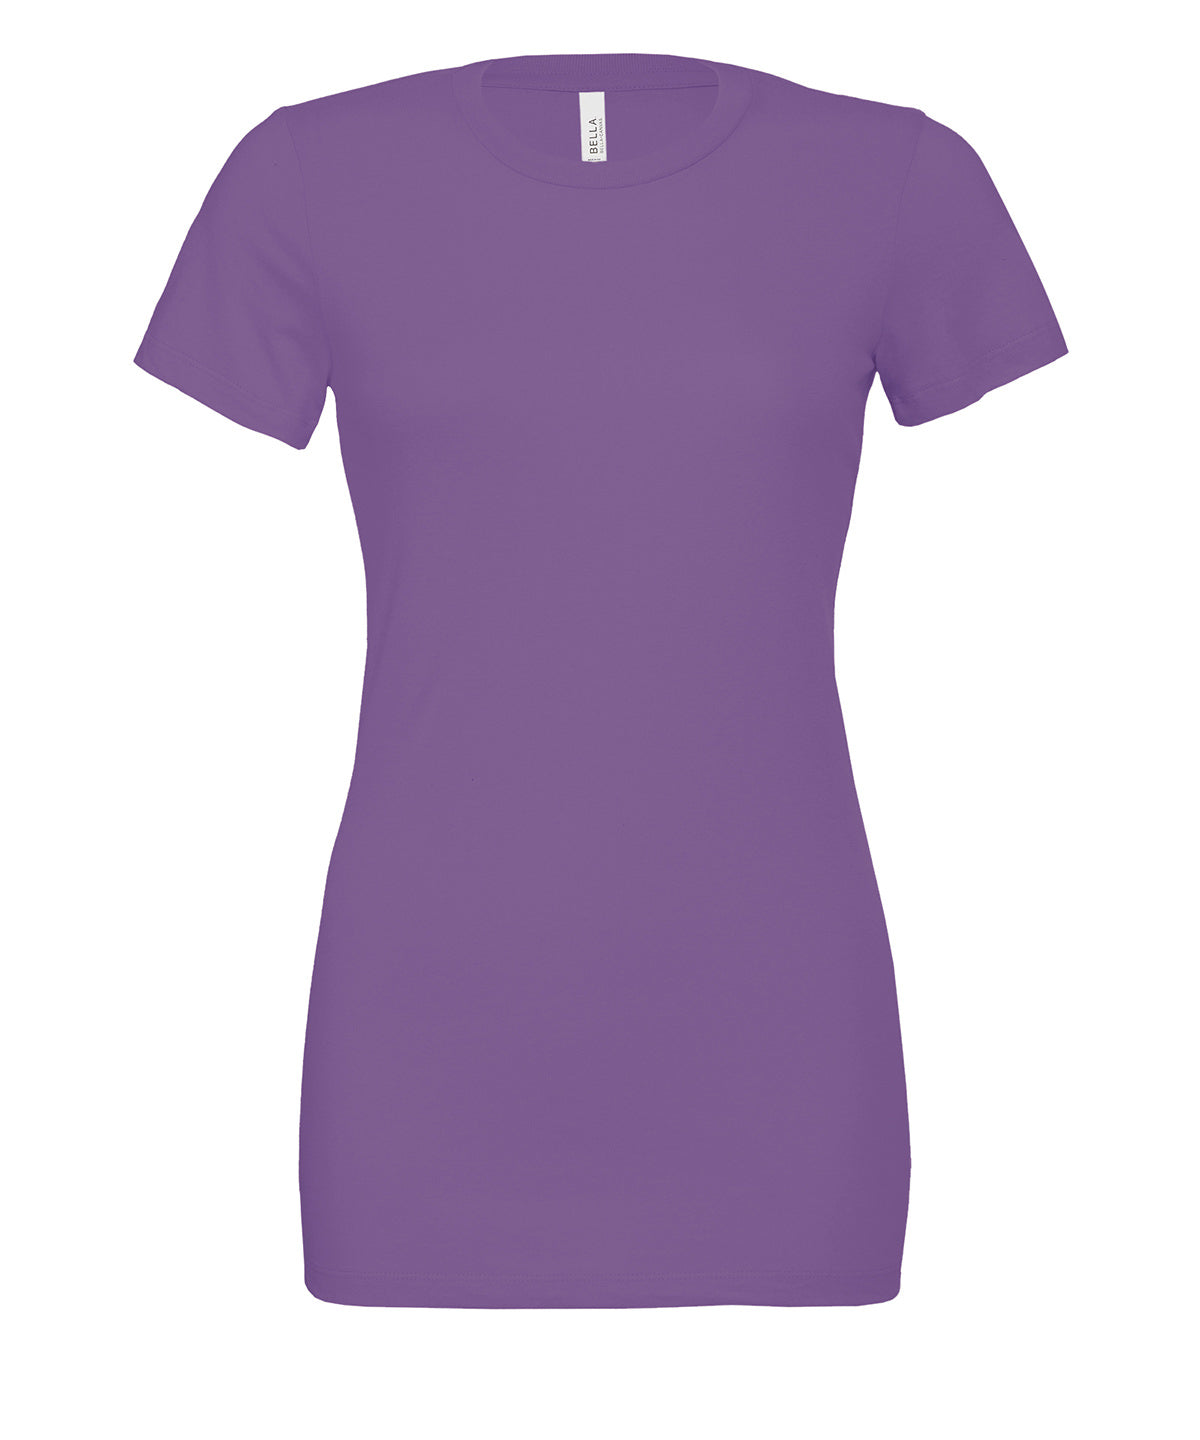 Bella Canvas Womens relaxed Jersey short sleeve tee Royal Purple